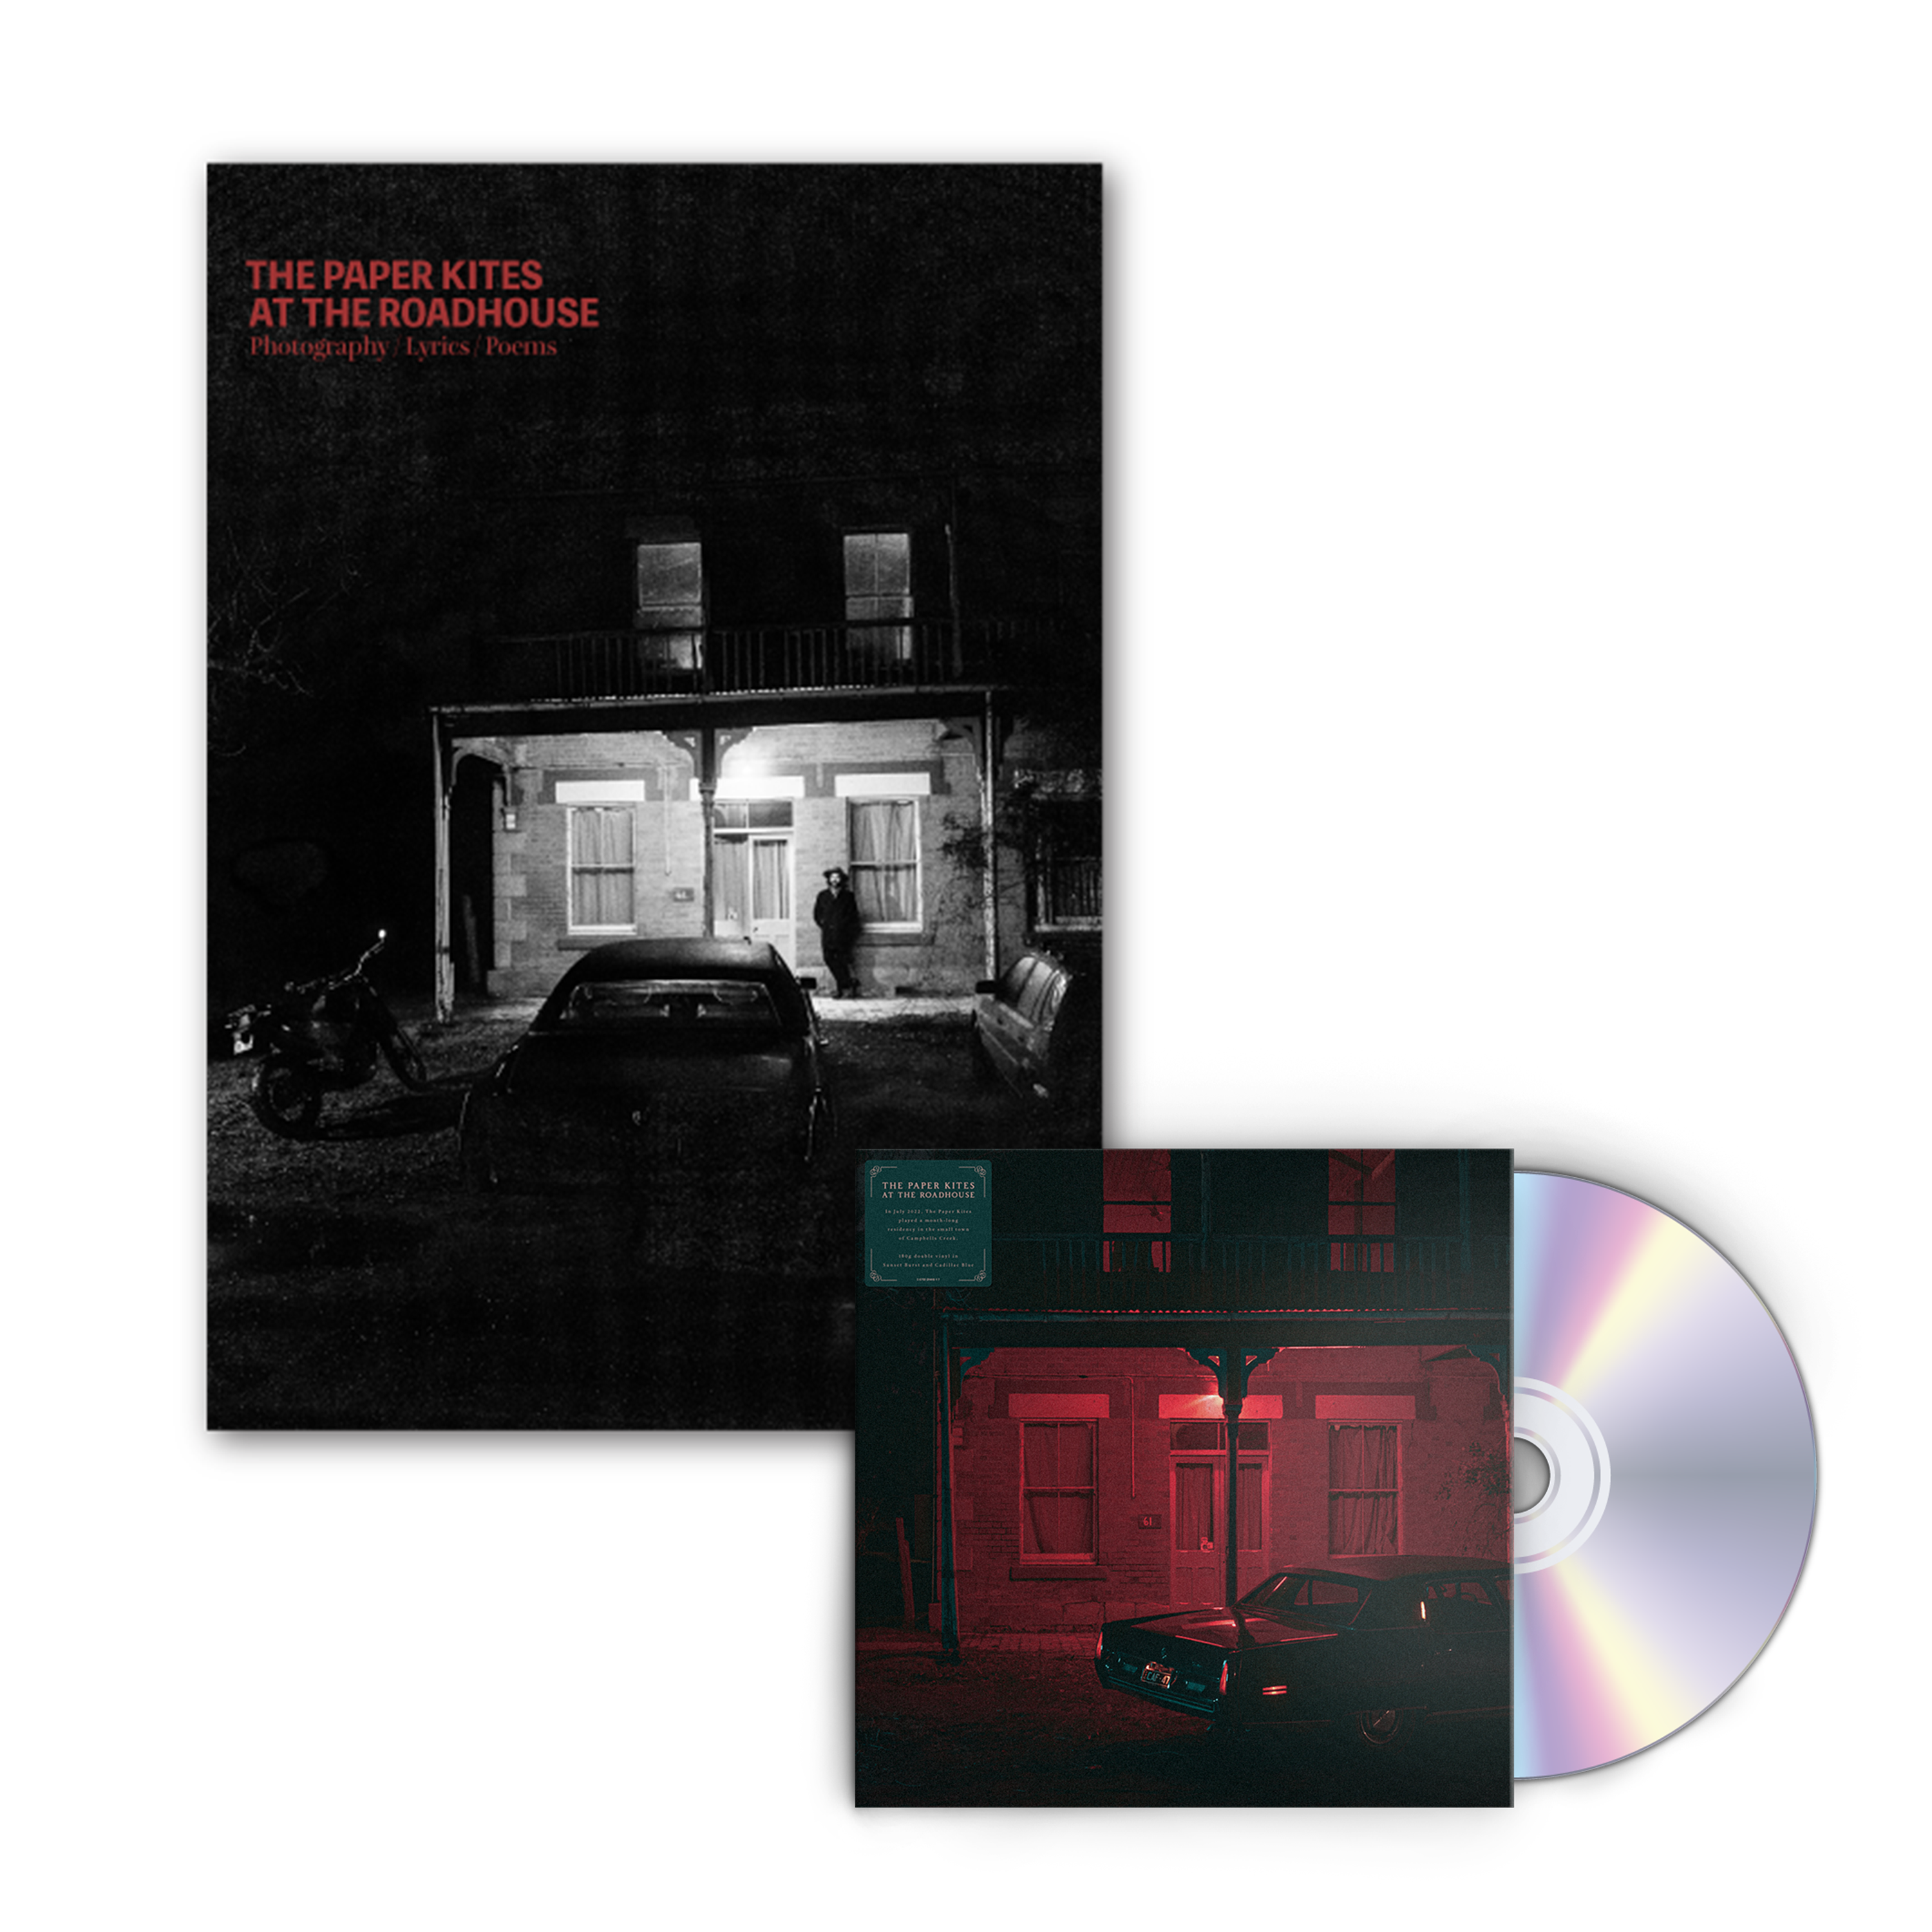 The Paper Kites | At The Roadhouse CD & Photo Book Bundle